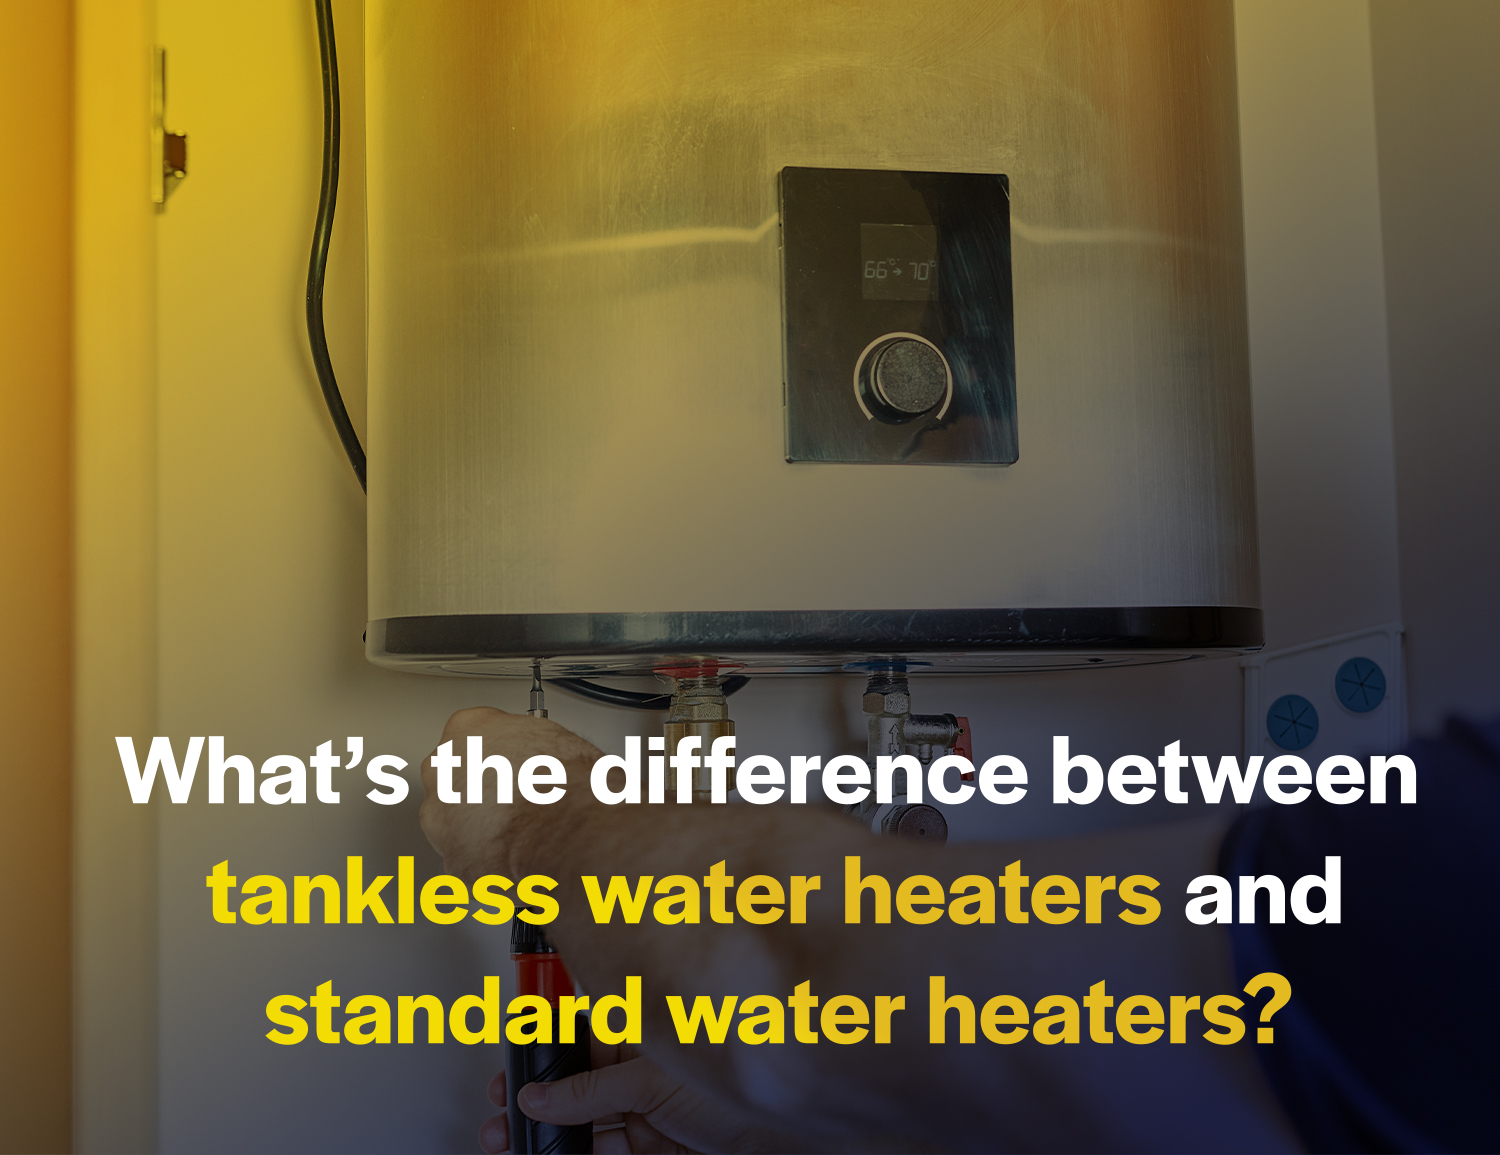 What’s the difference between tankless water heaters and standard water heaters?